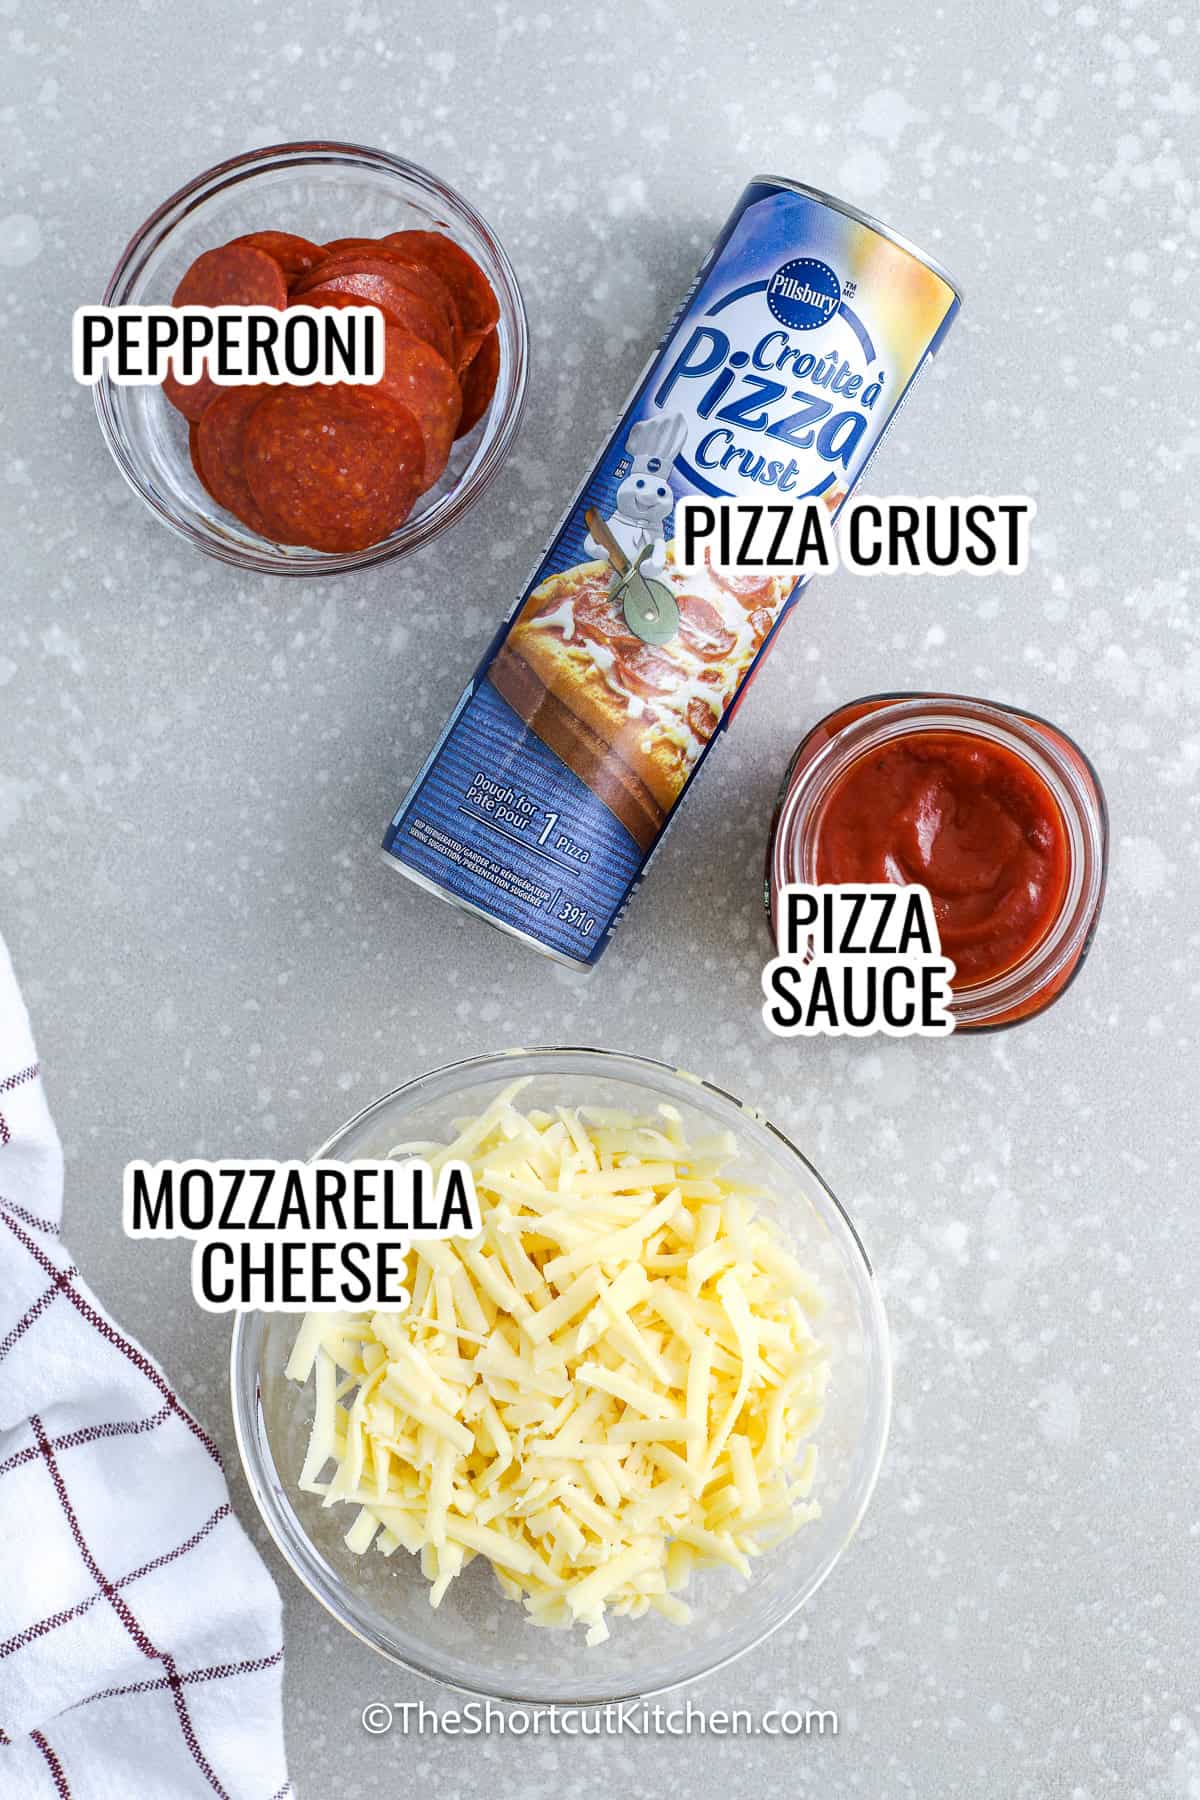 ingredients assembled to make grilled pizza, including mozzarella cheese, pepperoni, pizza crust, and pizza sauce